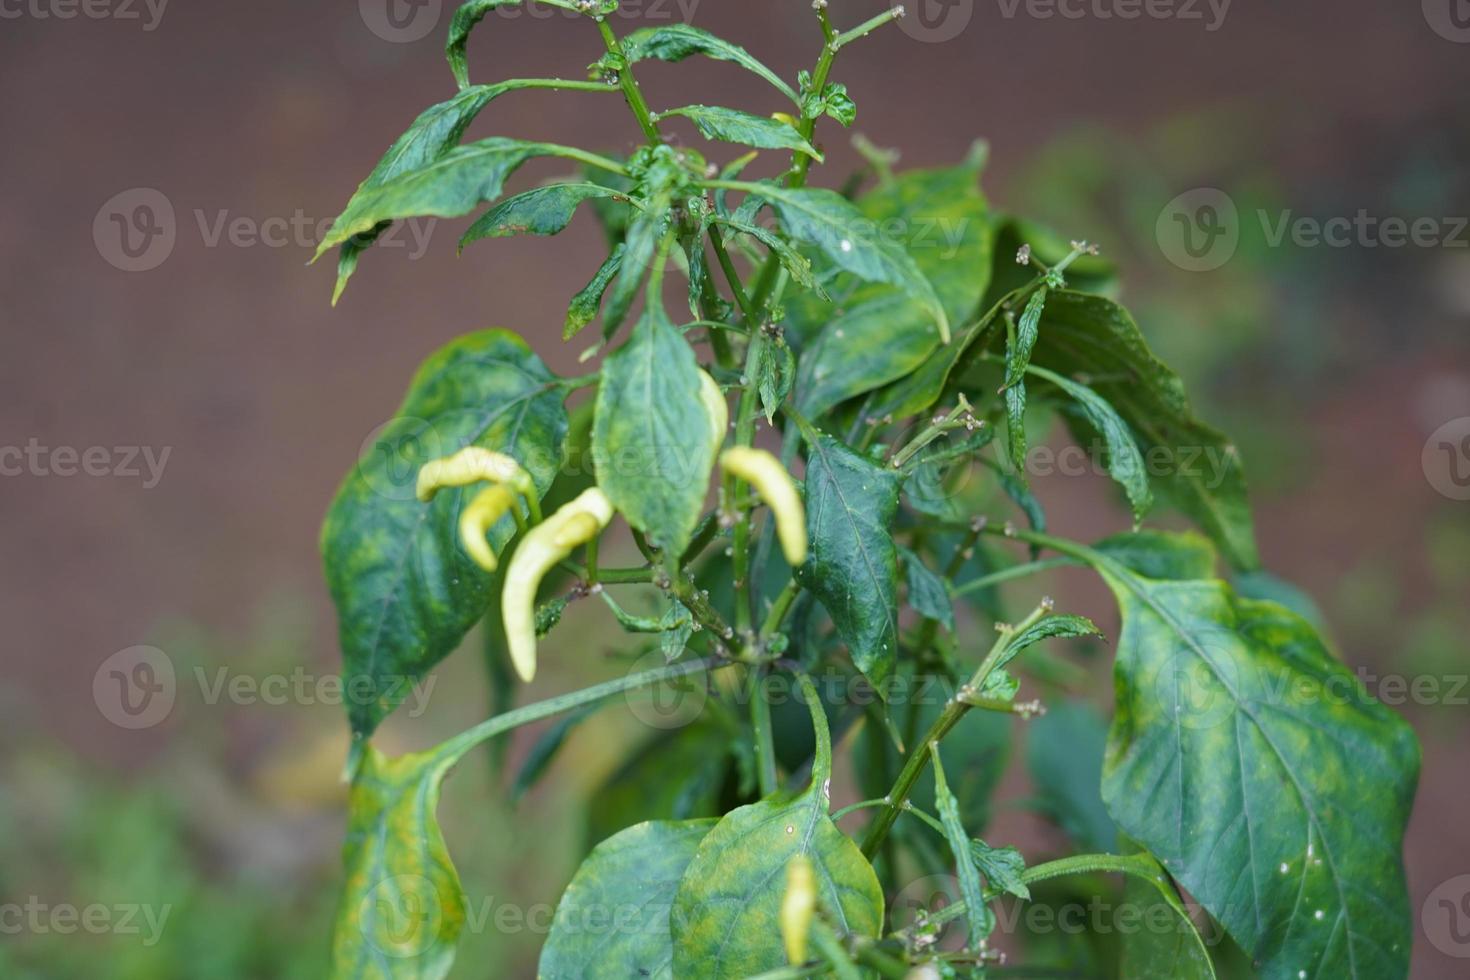 Chilli pepper growing in nature on the chili plant tree or bush photo